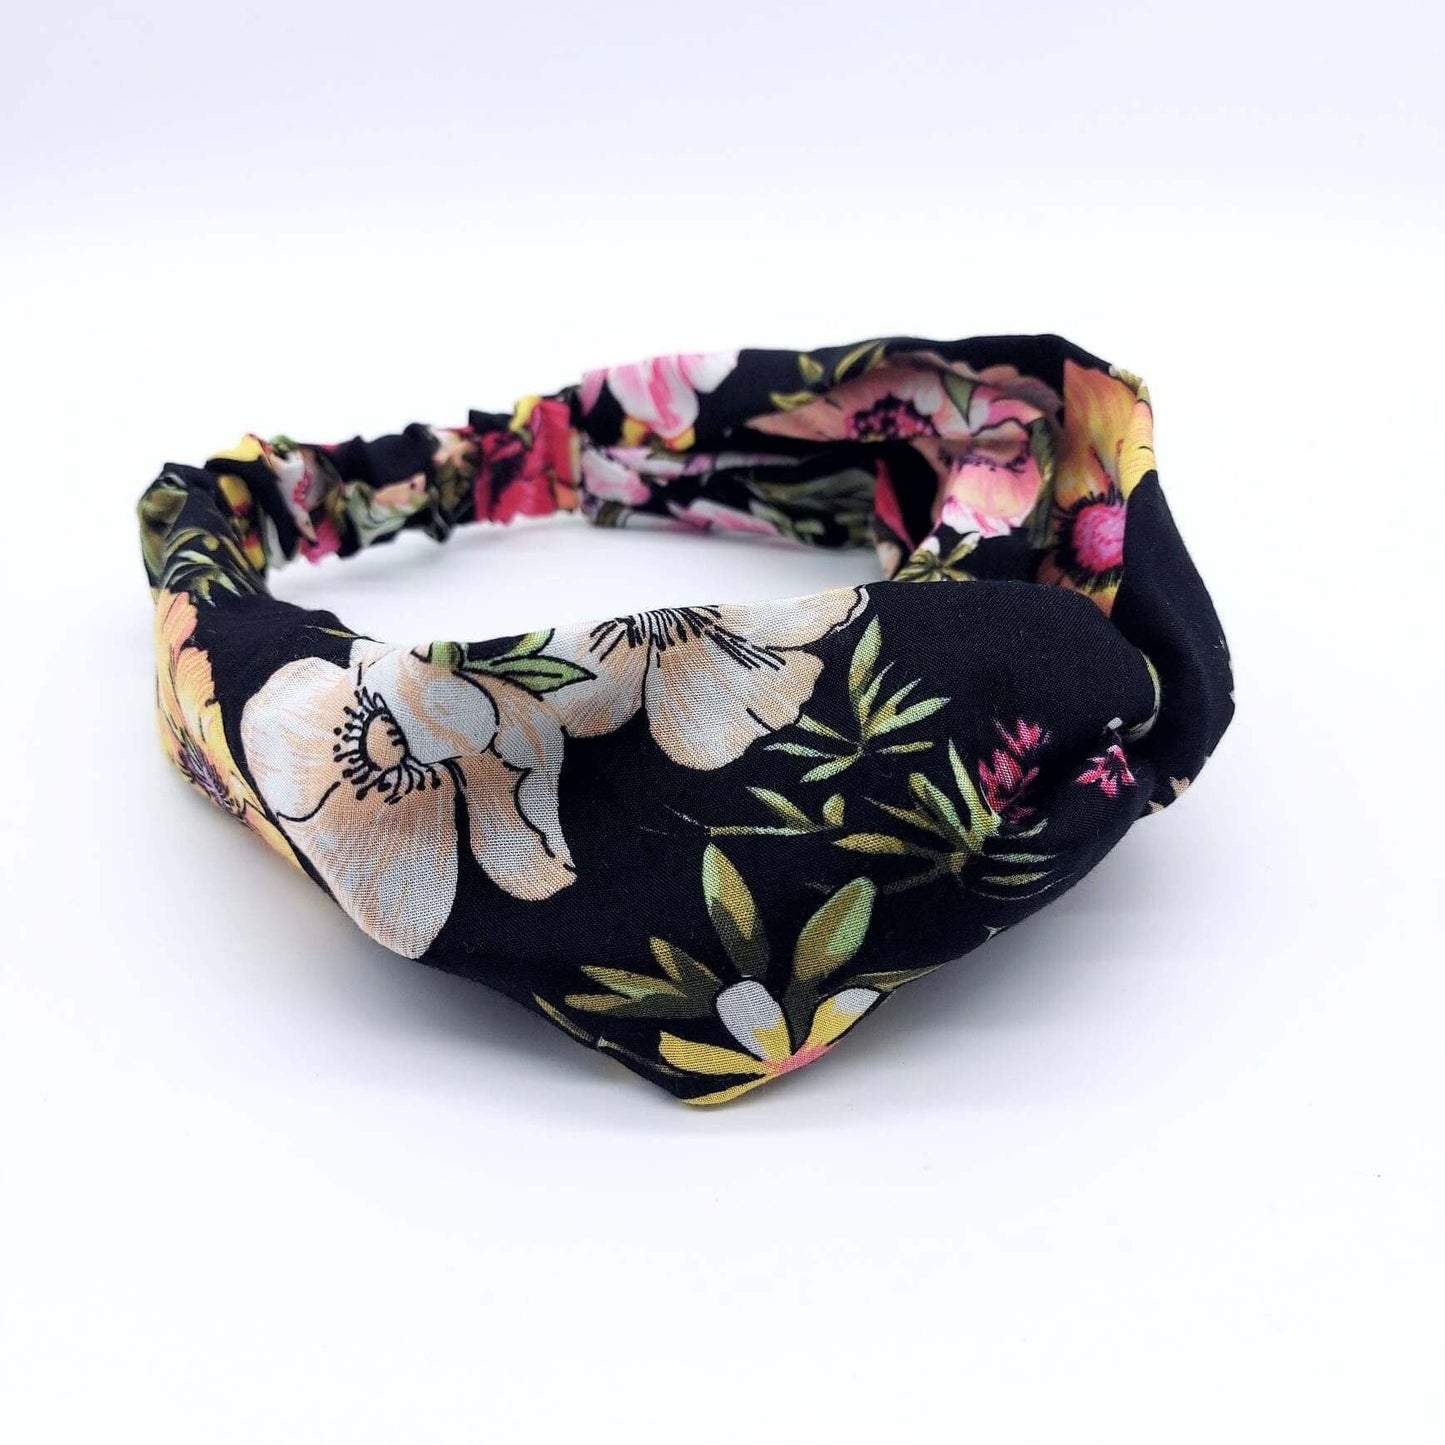 A soft, black viscose, floral print, turban twist headband with large flowers in pink, yellow and peach.